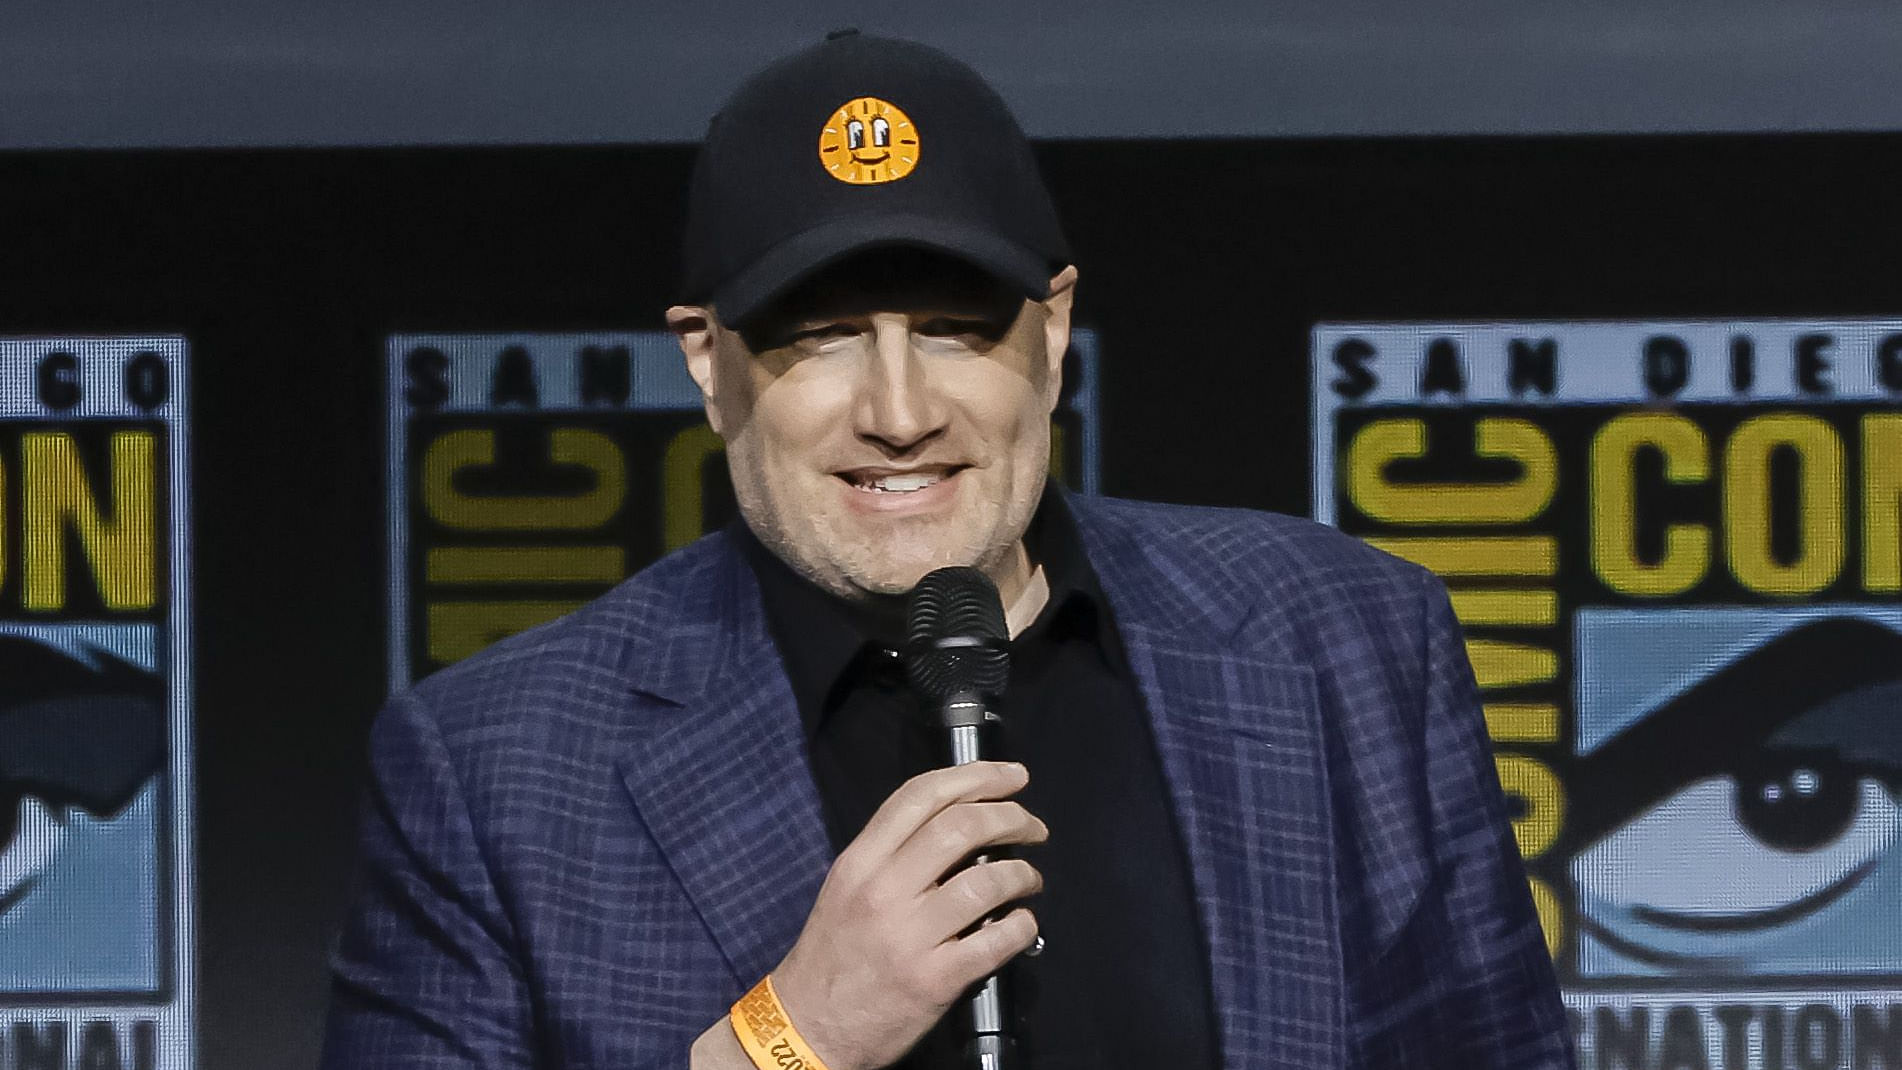 The film’s release was announced by the president of Marvel Studios, Kevin Feige, who also noted the upcoming release of several other films and shows. Credit: AFP photo 